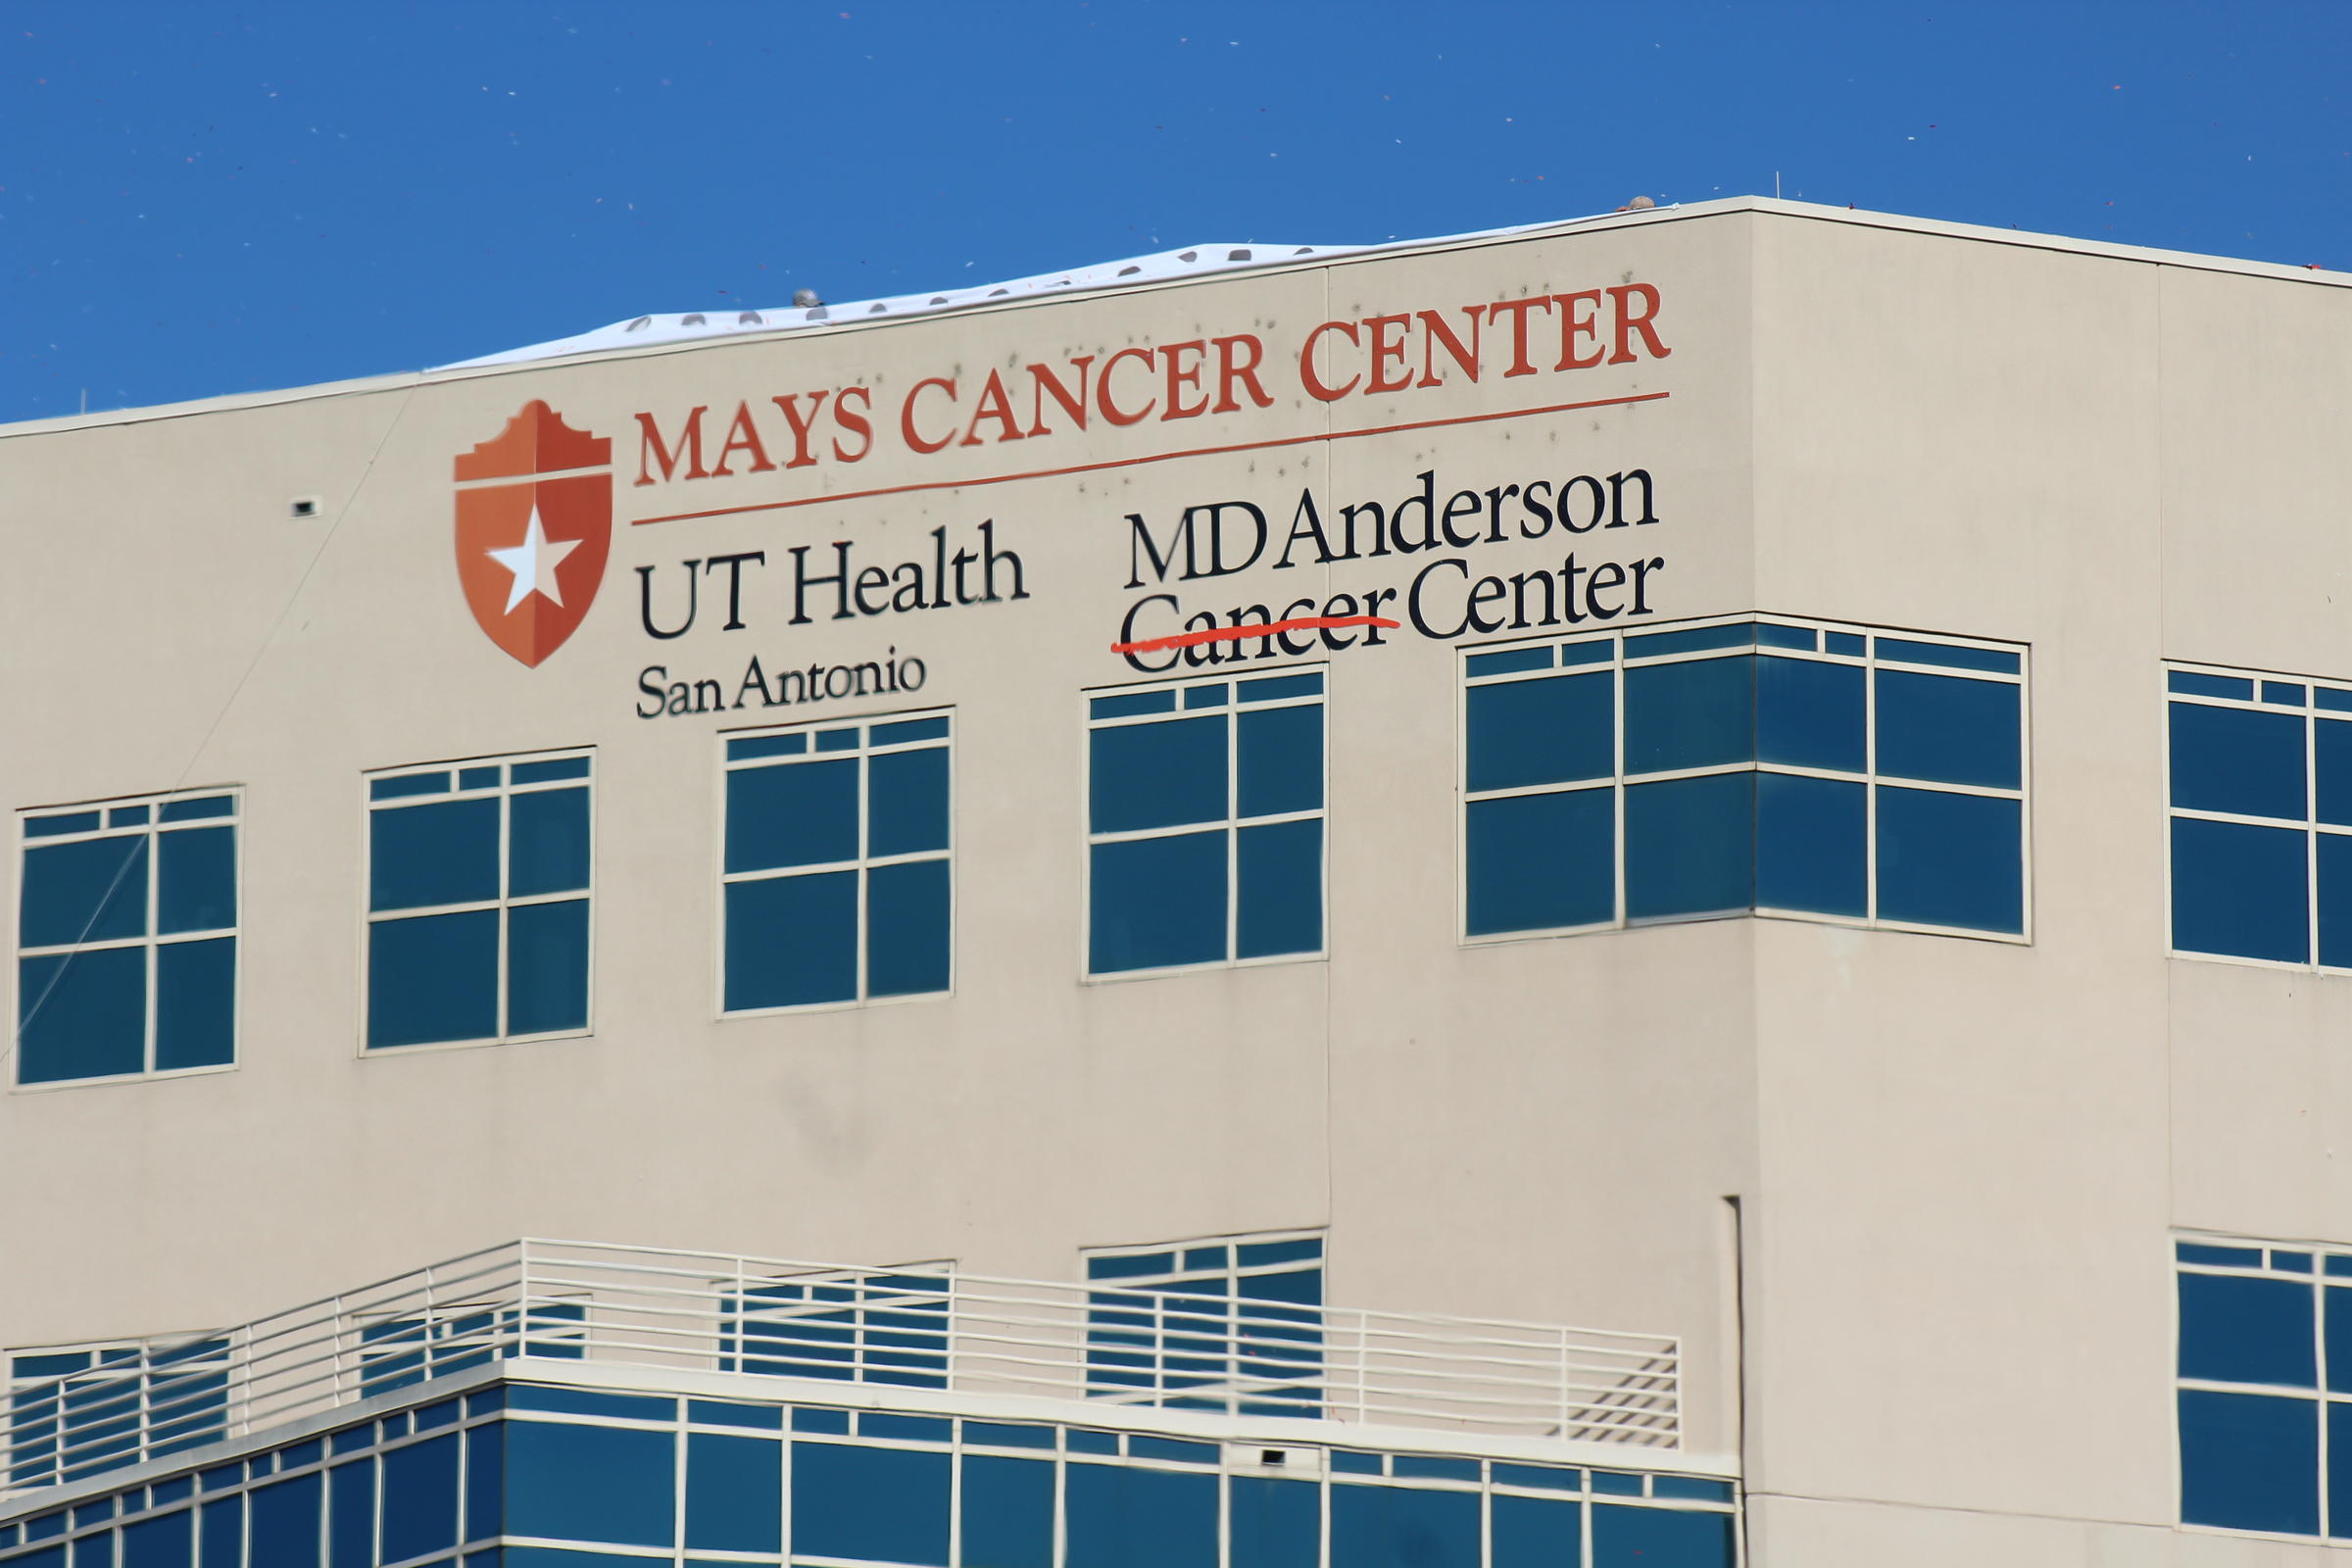 Mays Cancer Center UT Health San Antonio seeing cancer patients and tracking coronavirus covid-19